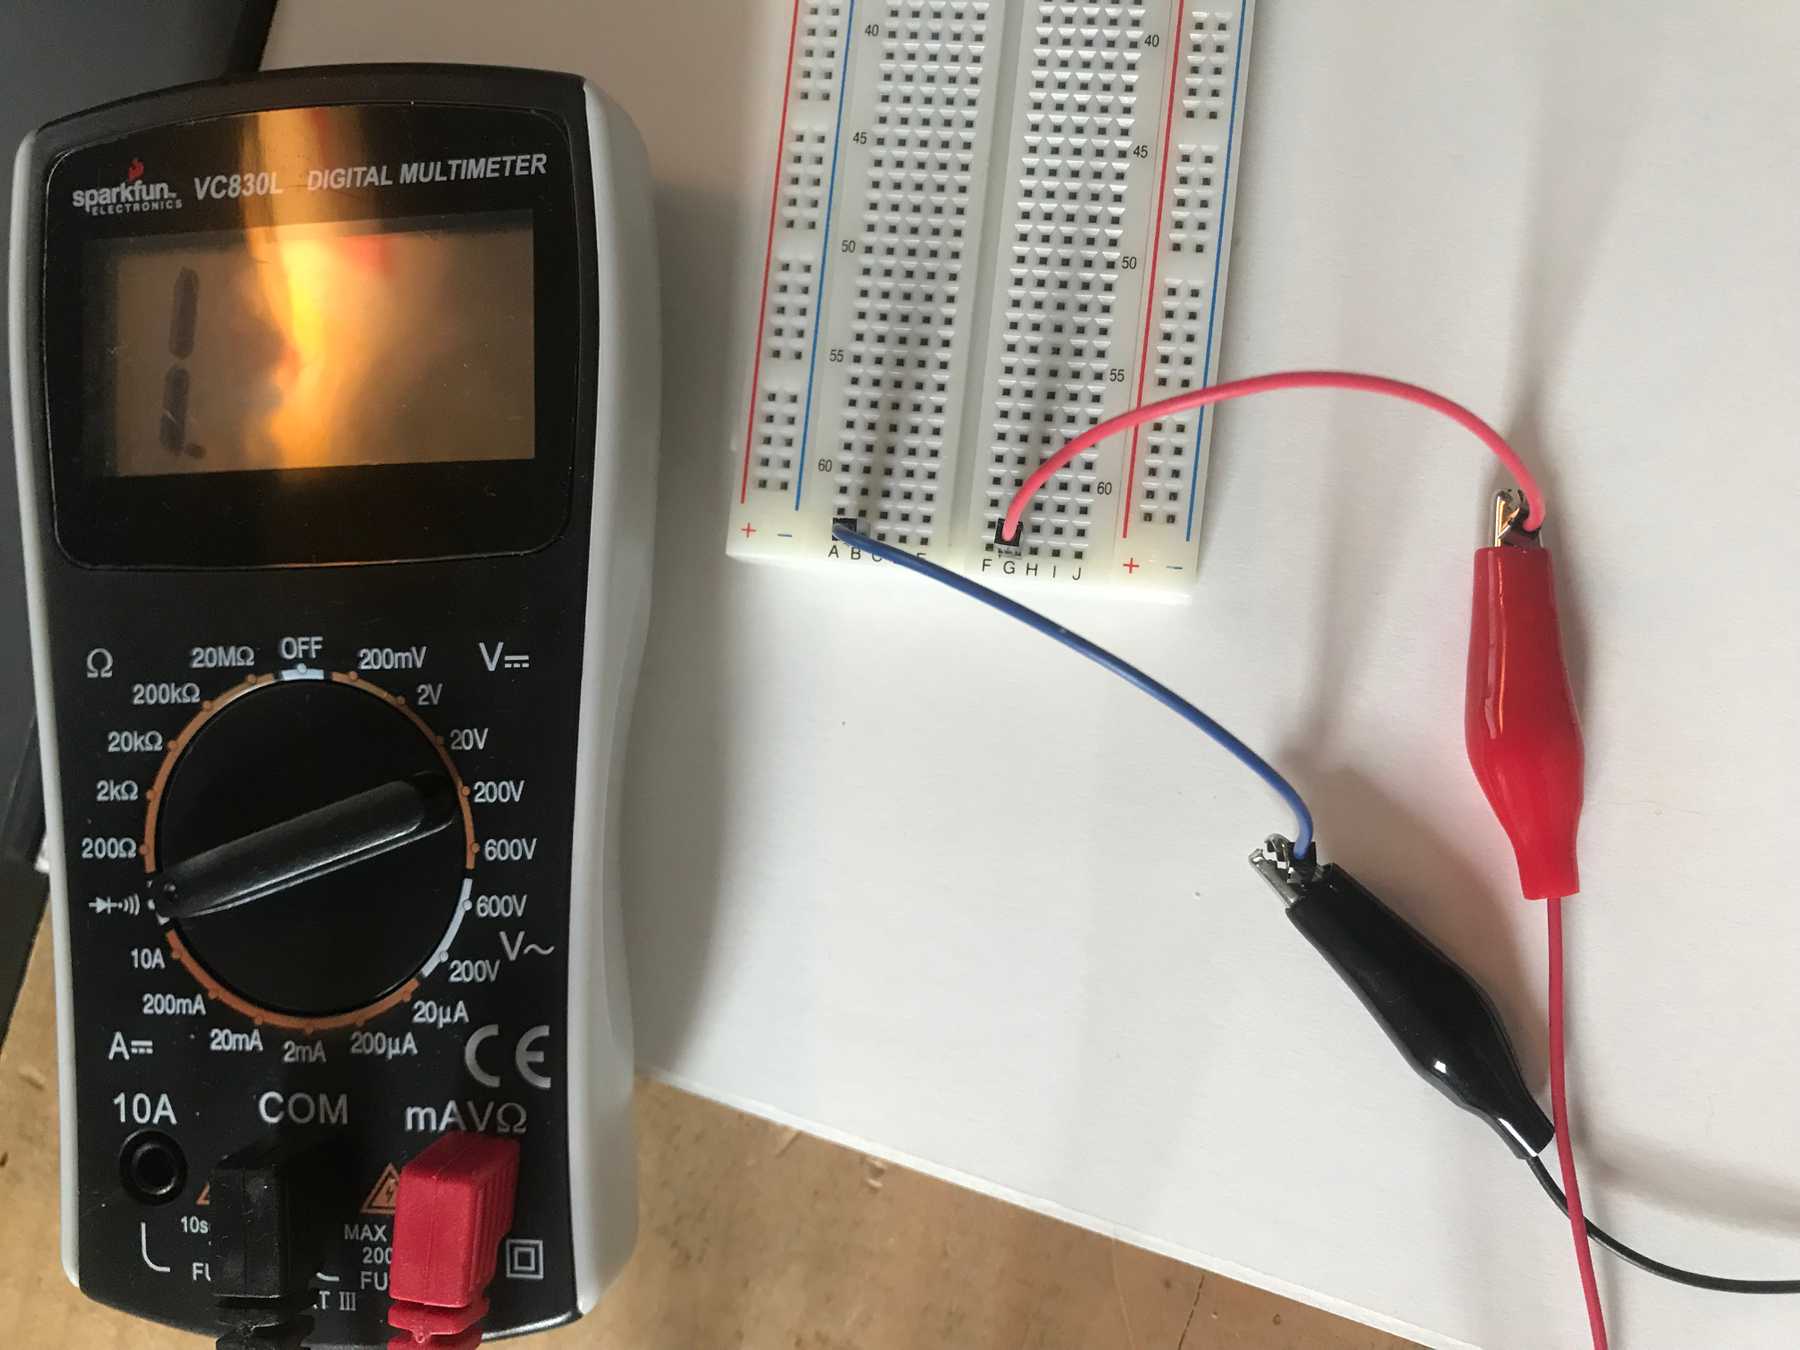 Non-continuous points on the breadboard